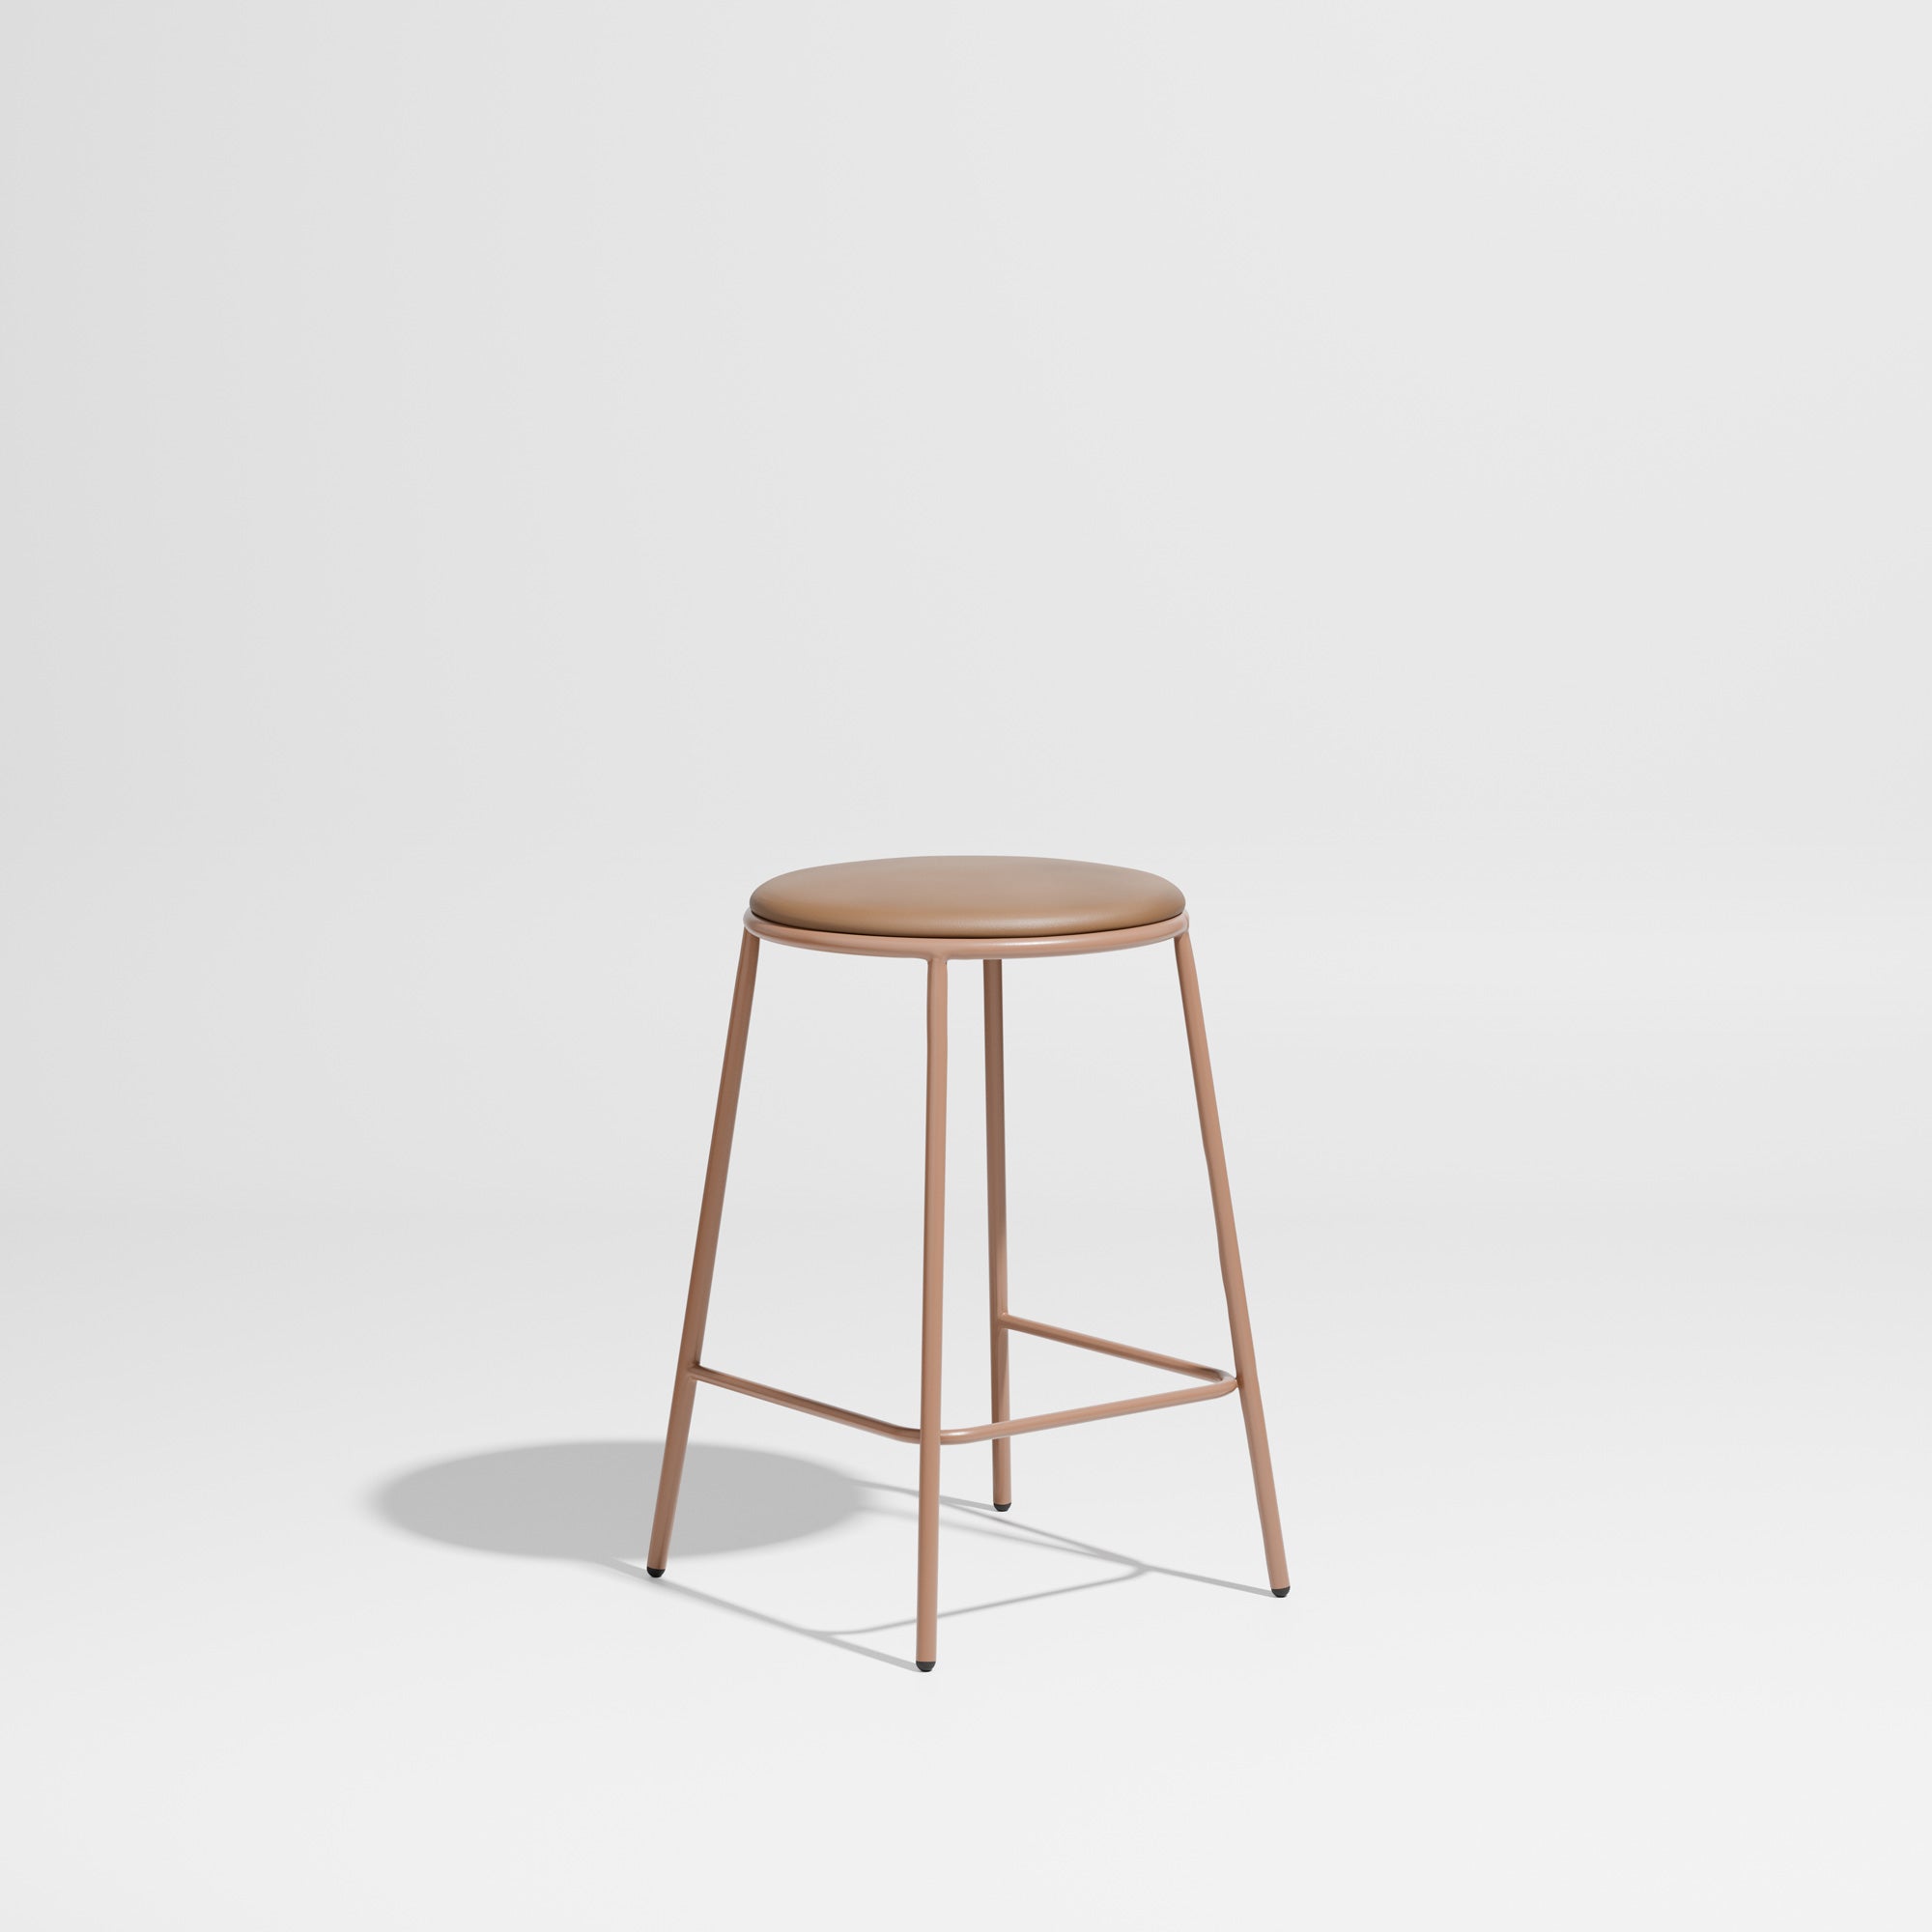 Piper Bar Counter Stool Upholstered | Fabric or Leather Seat | Designed by GibsonKarlo | DesignByThem